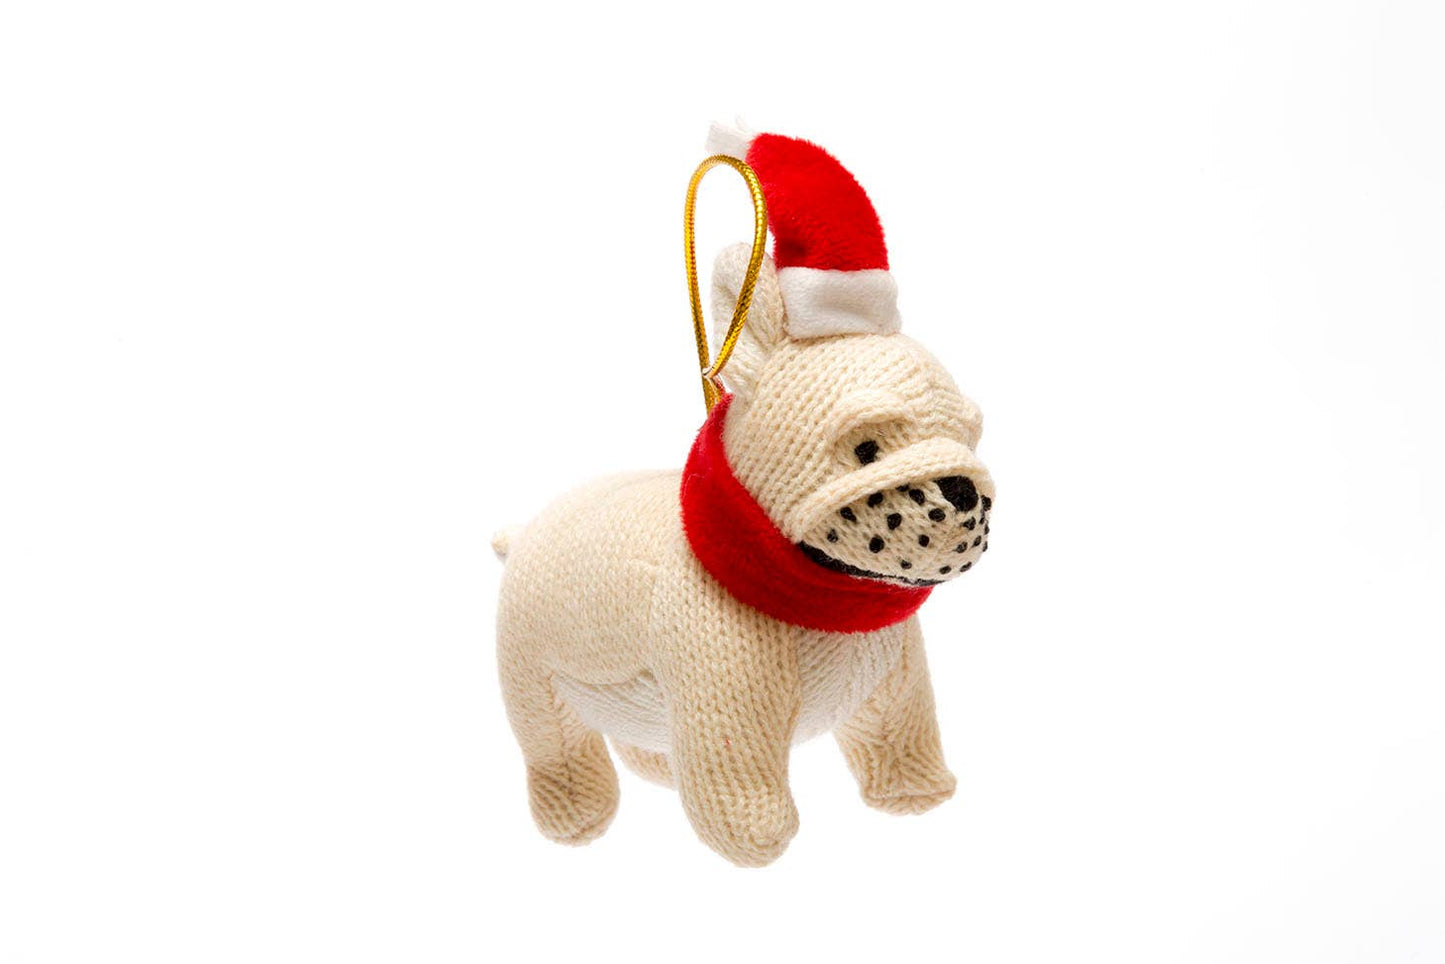 French Bulldog Ornament from Best Years Ltd